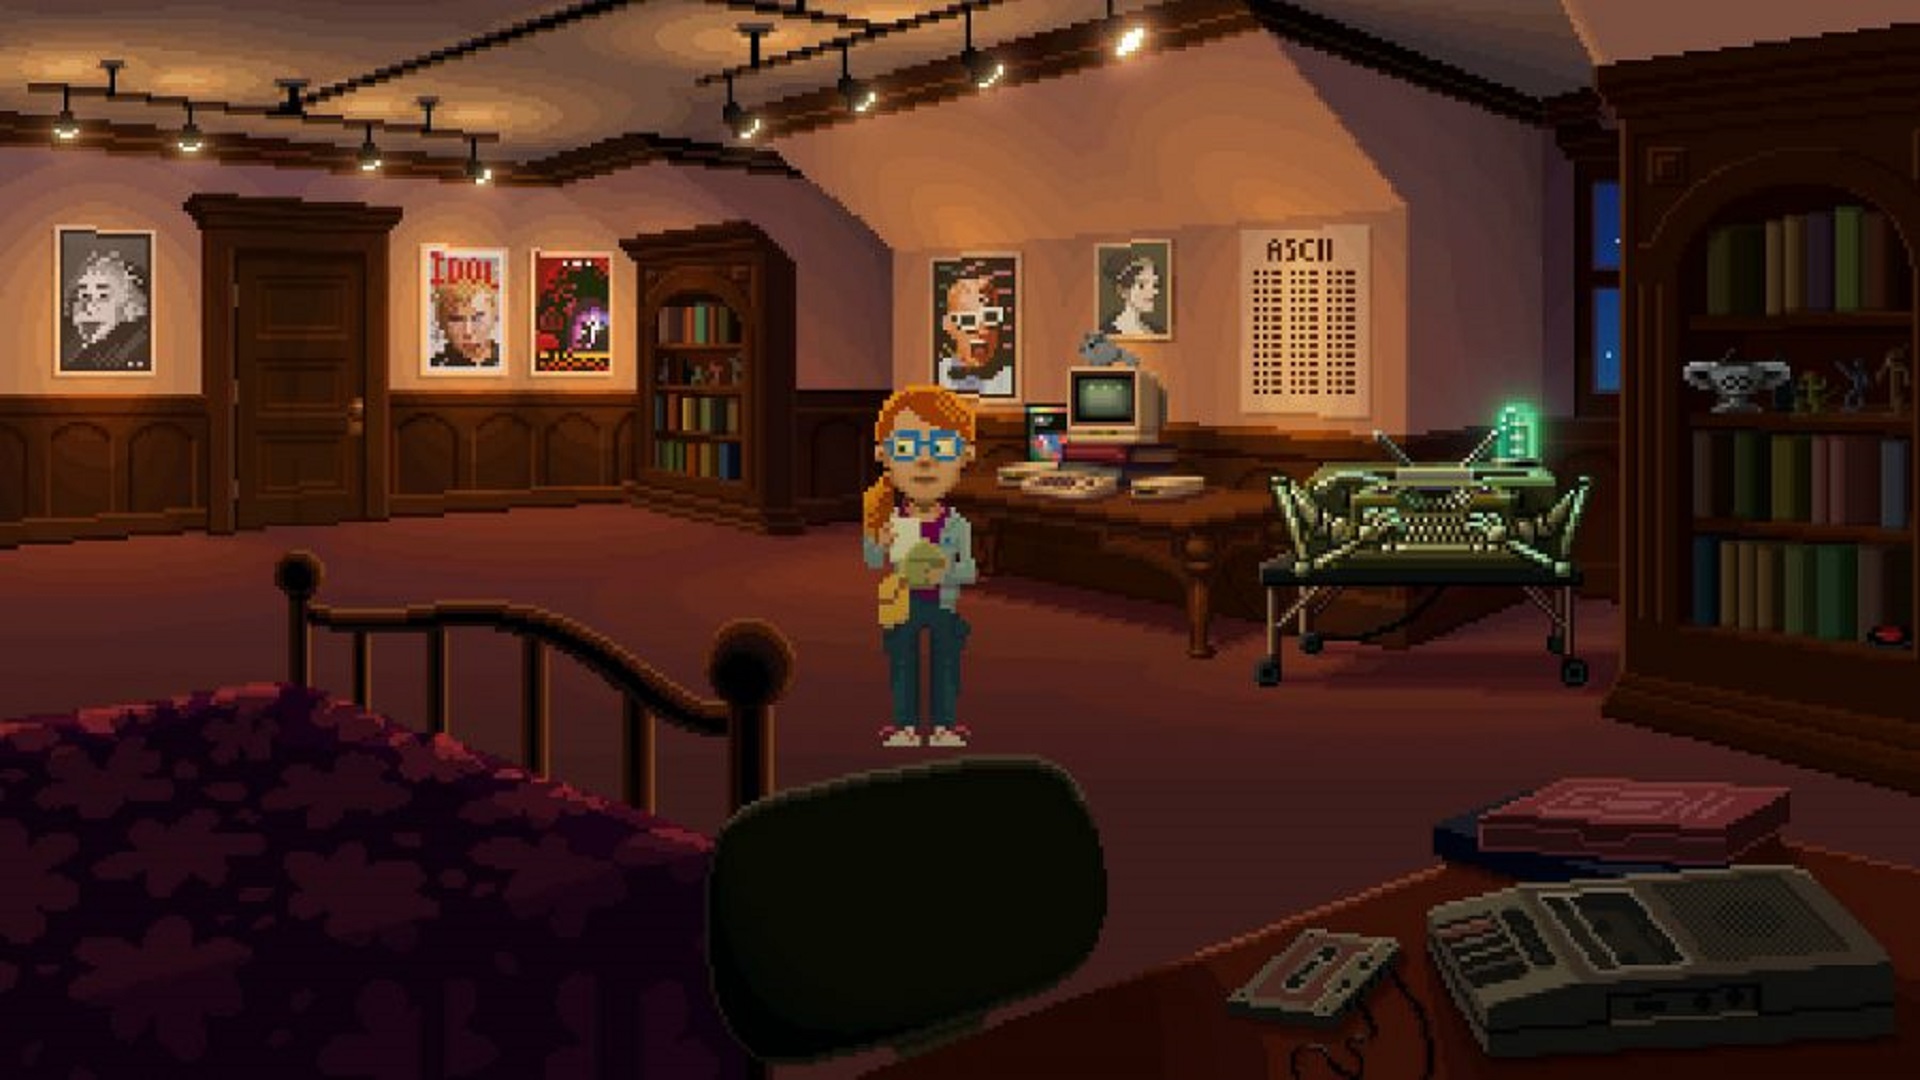 The best adventure games of all time